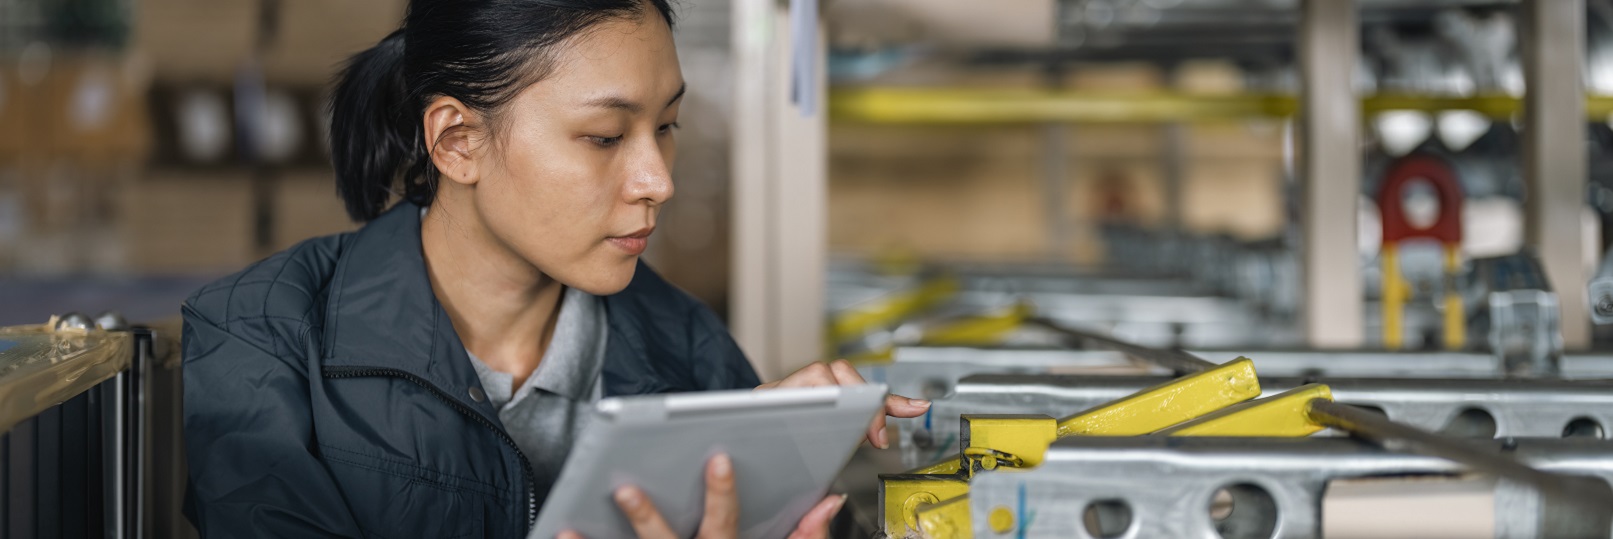 Female worker in warehouse on tablet.